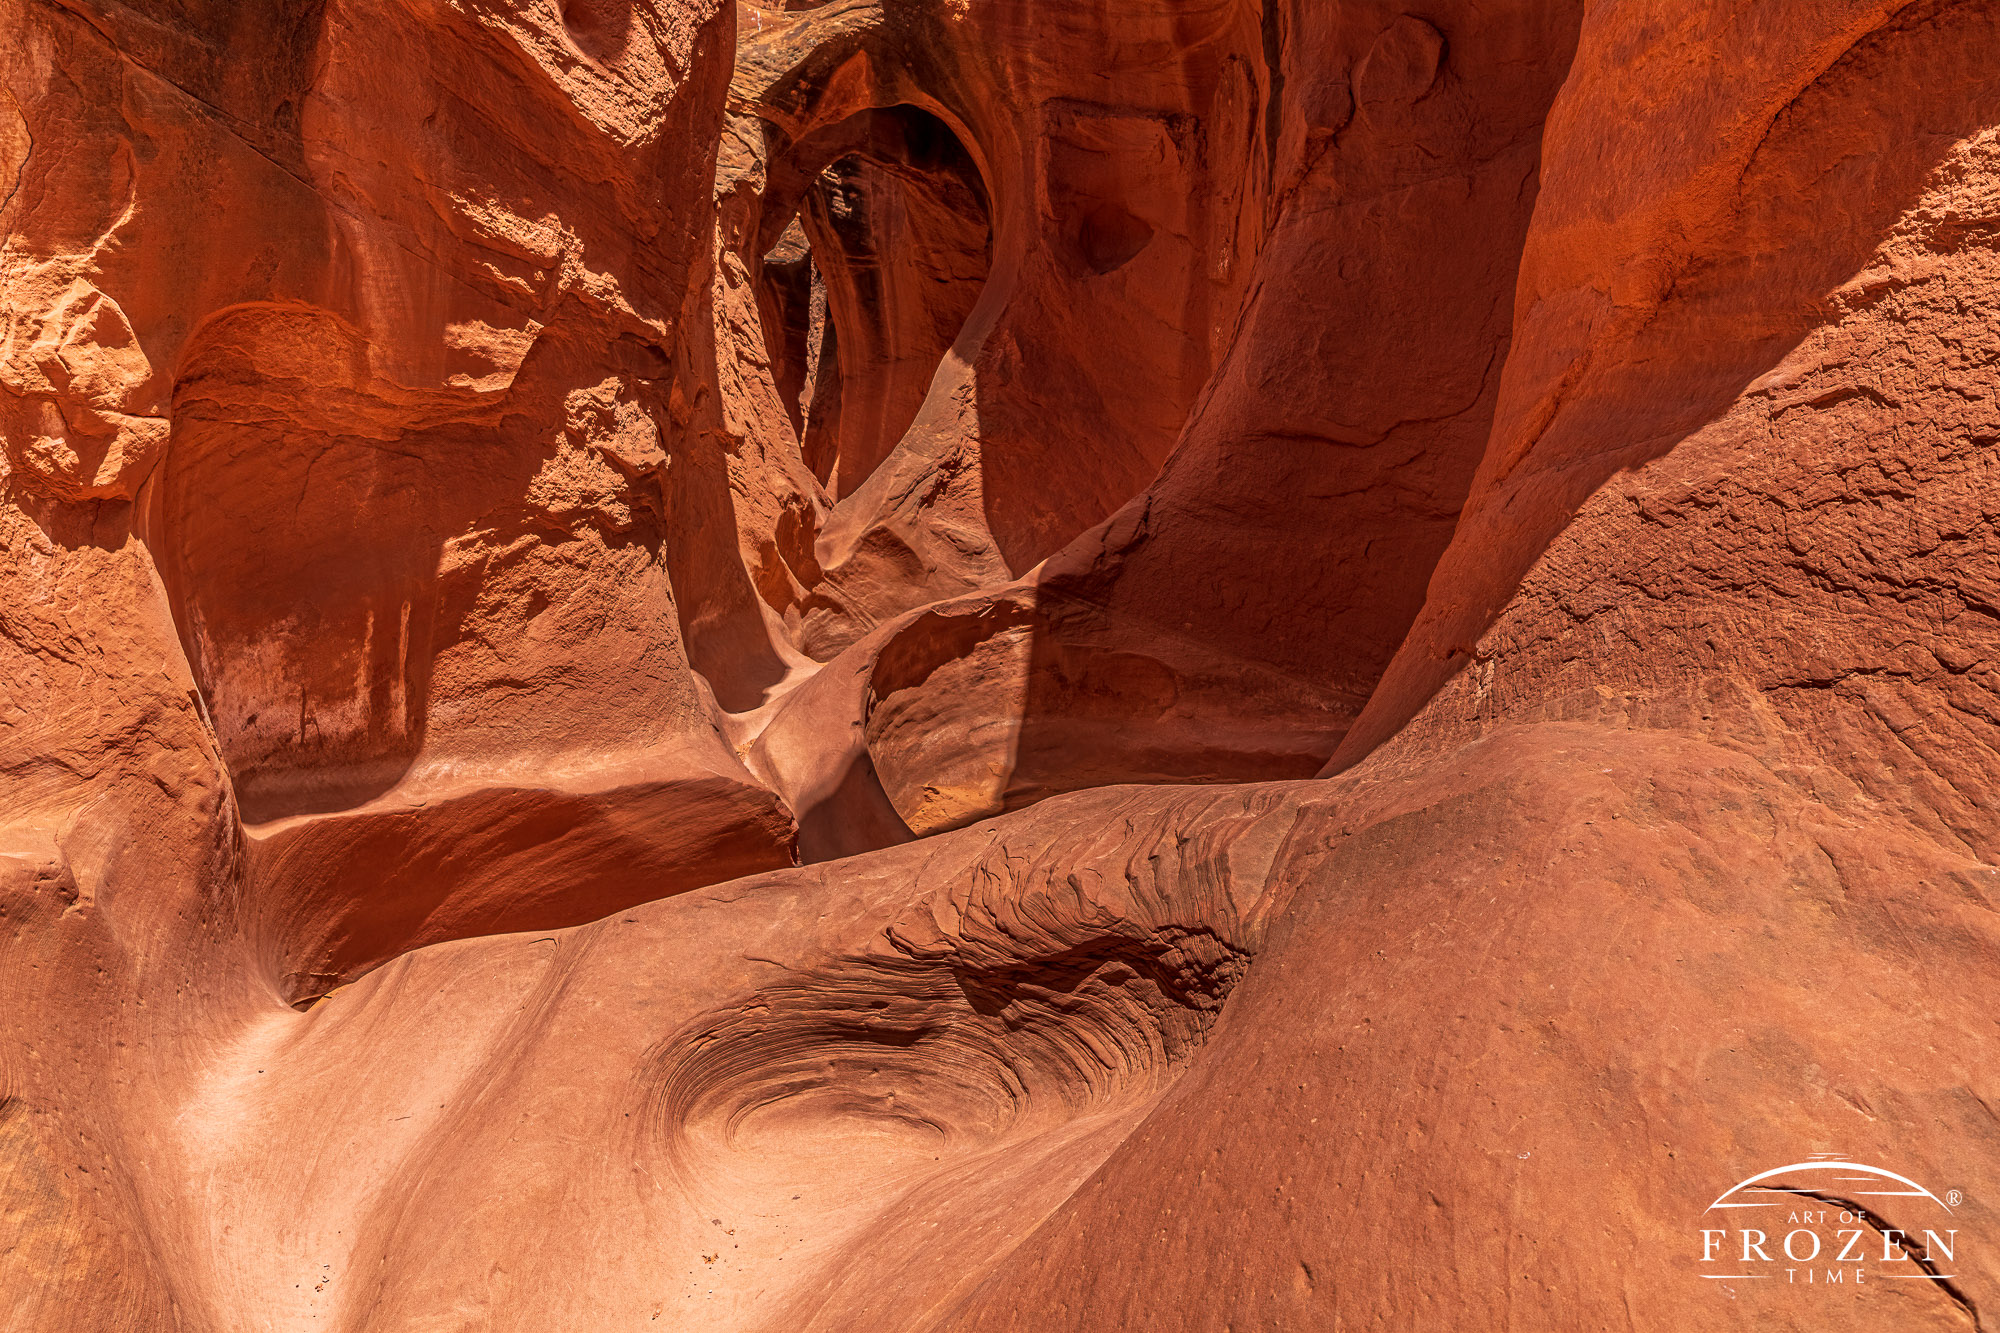 The iconic section of Peek-a-Boo Slot Canyon which shows a series of erosion cuts in the red Navajo Sandstone creating facinating textures and shapes